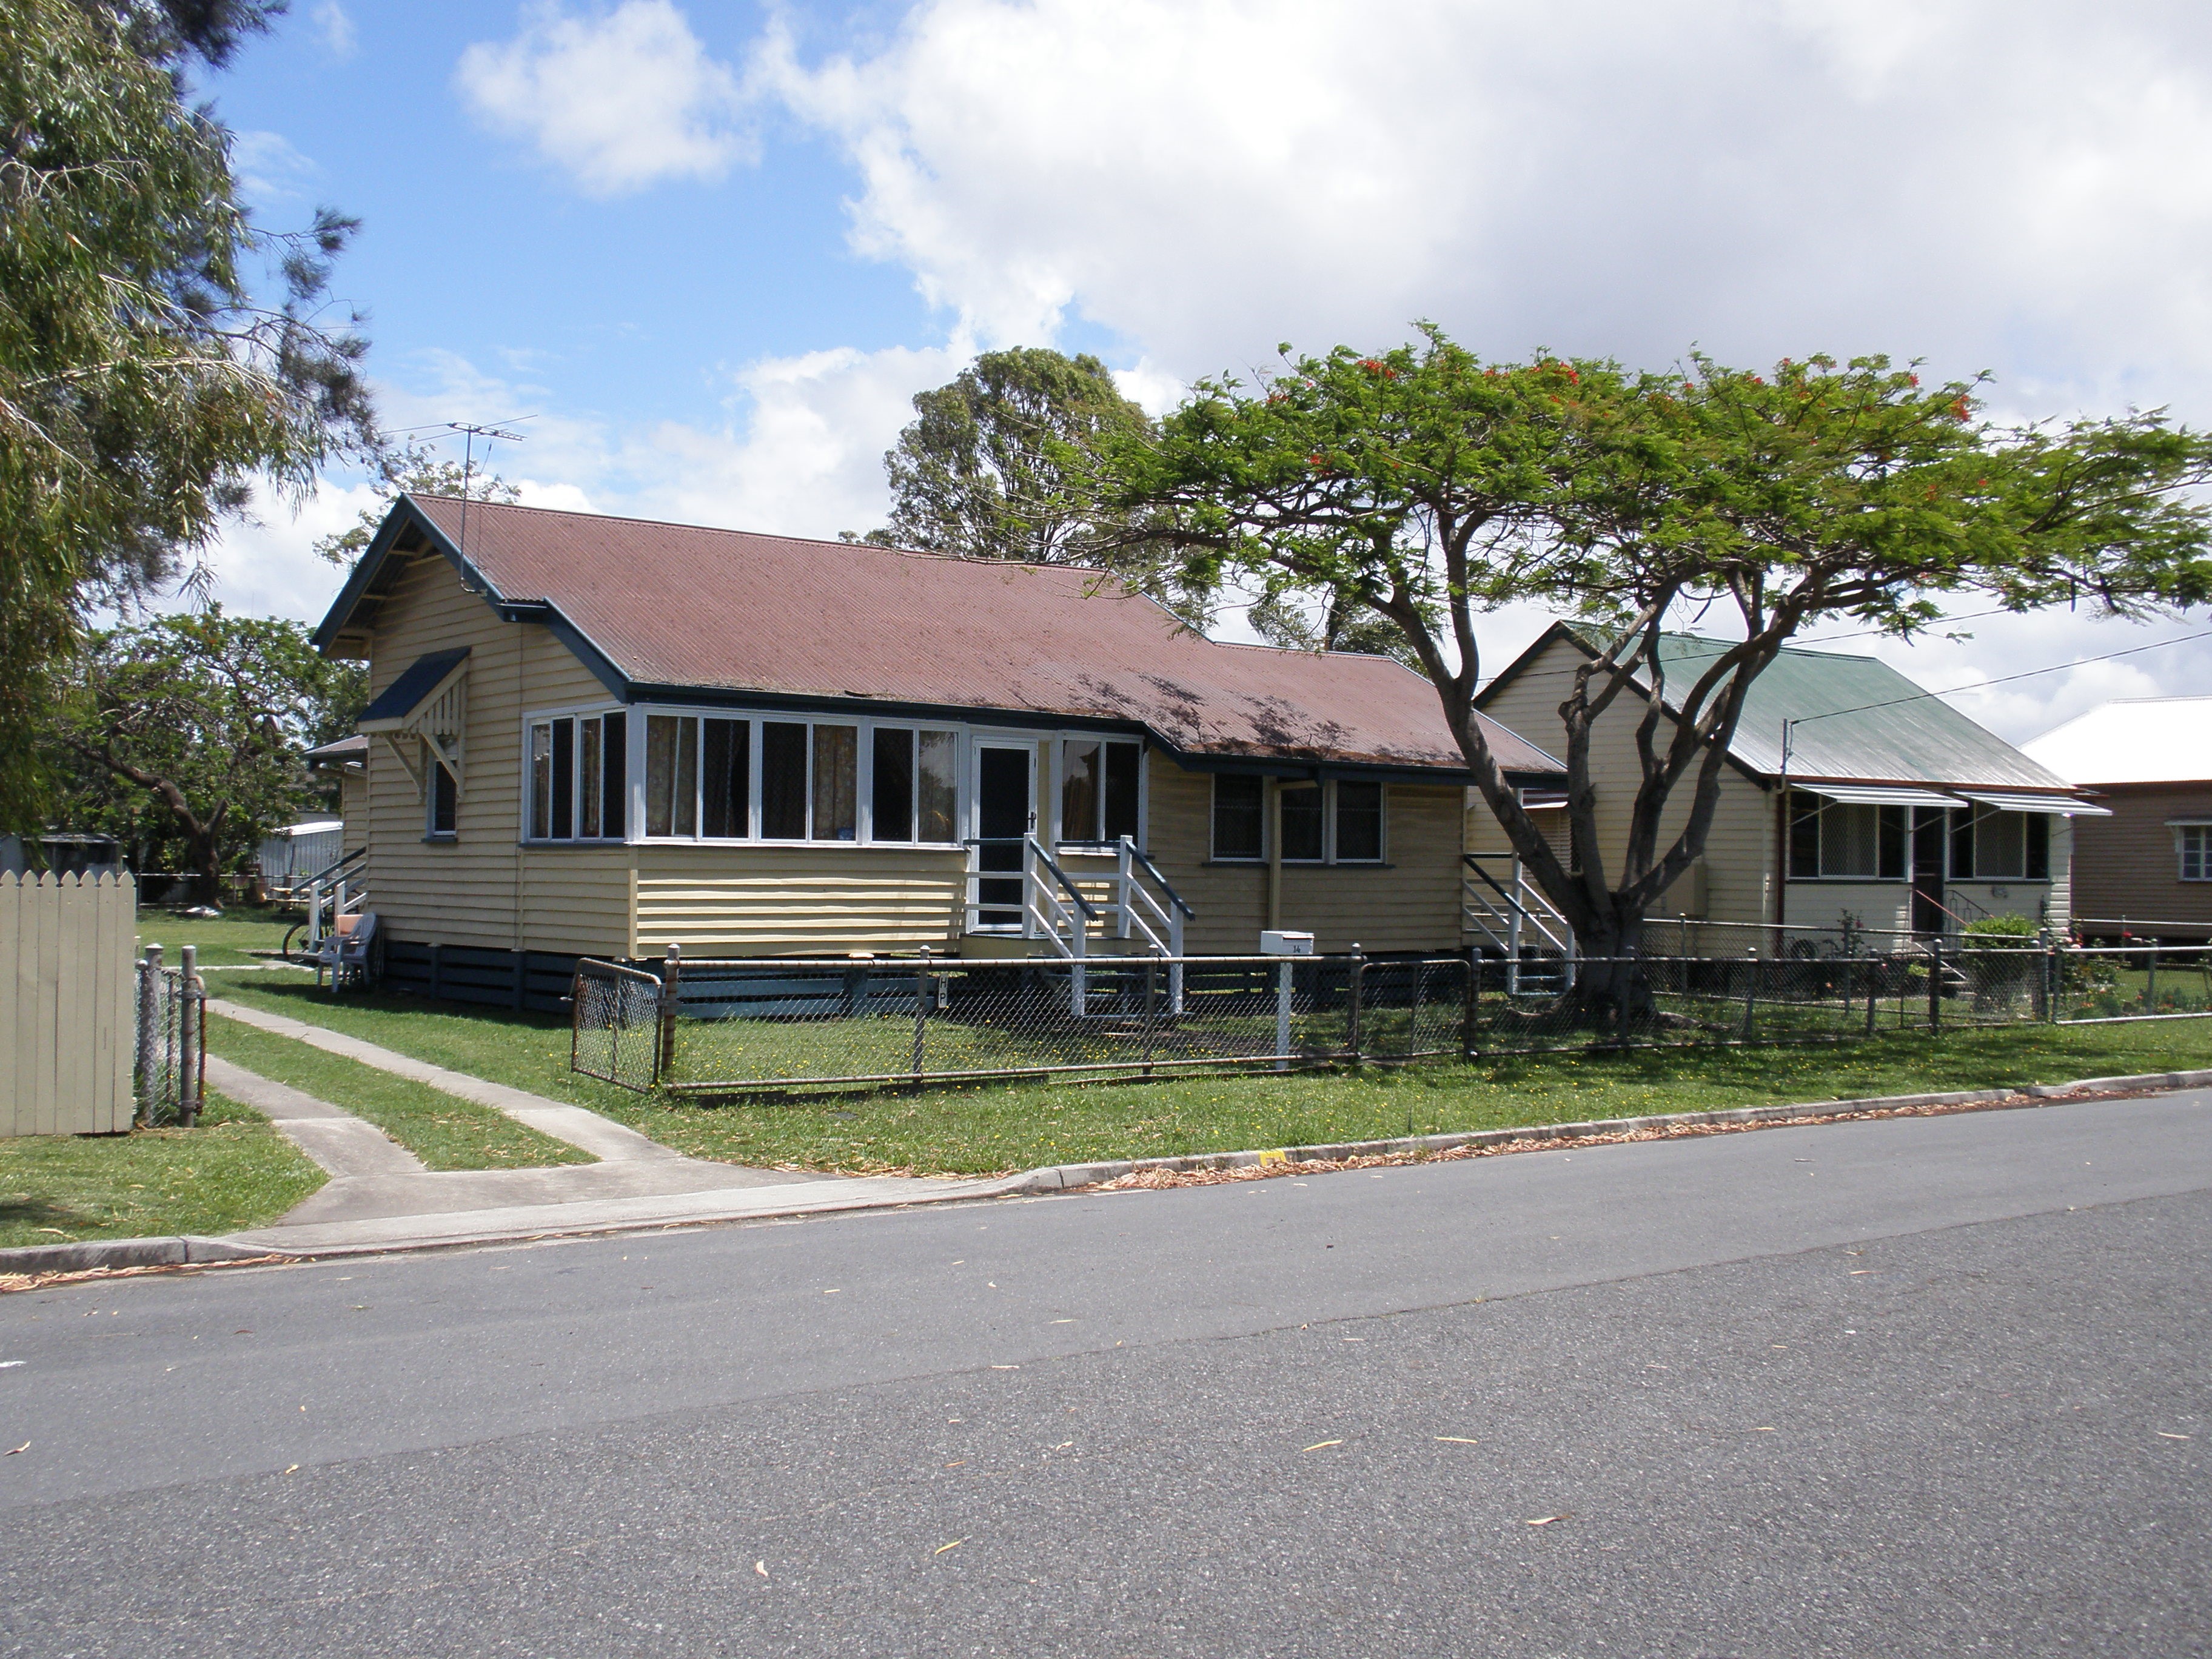 This is an image of the Heritage Place known as the Pinkenba Police Station located at 14 Serpentine Road in Pinkenba